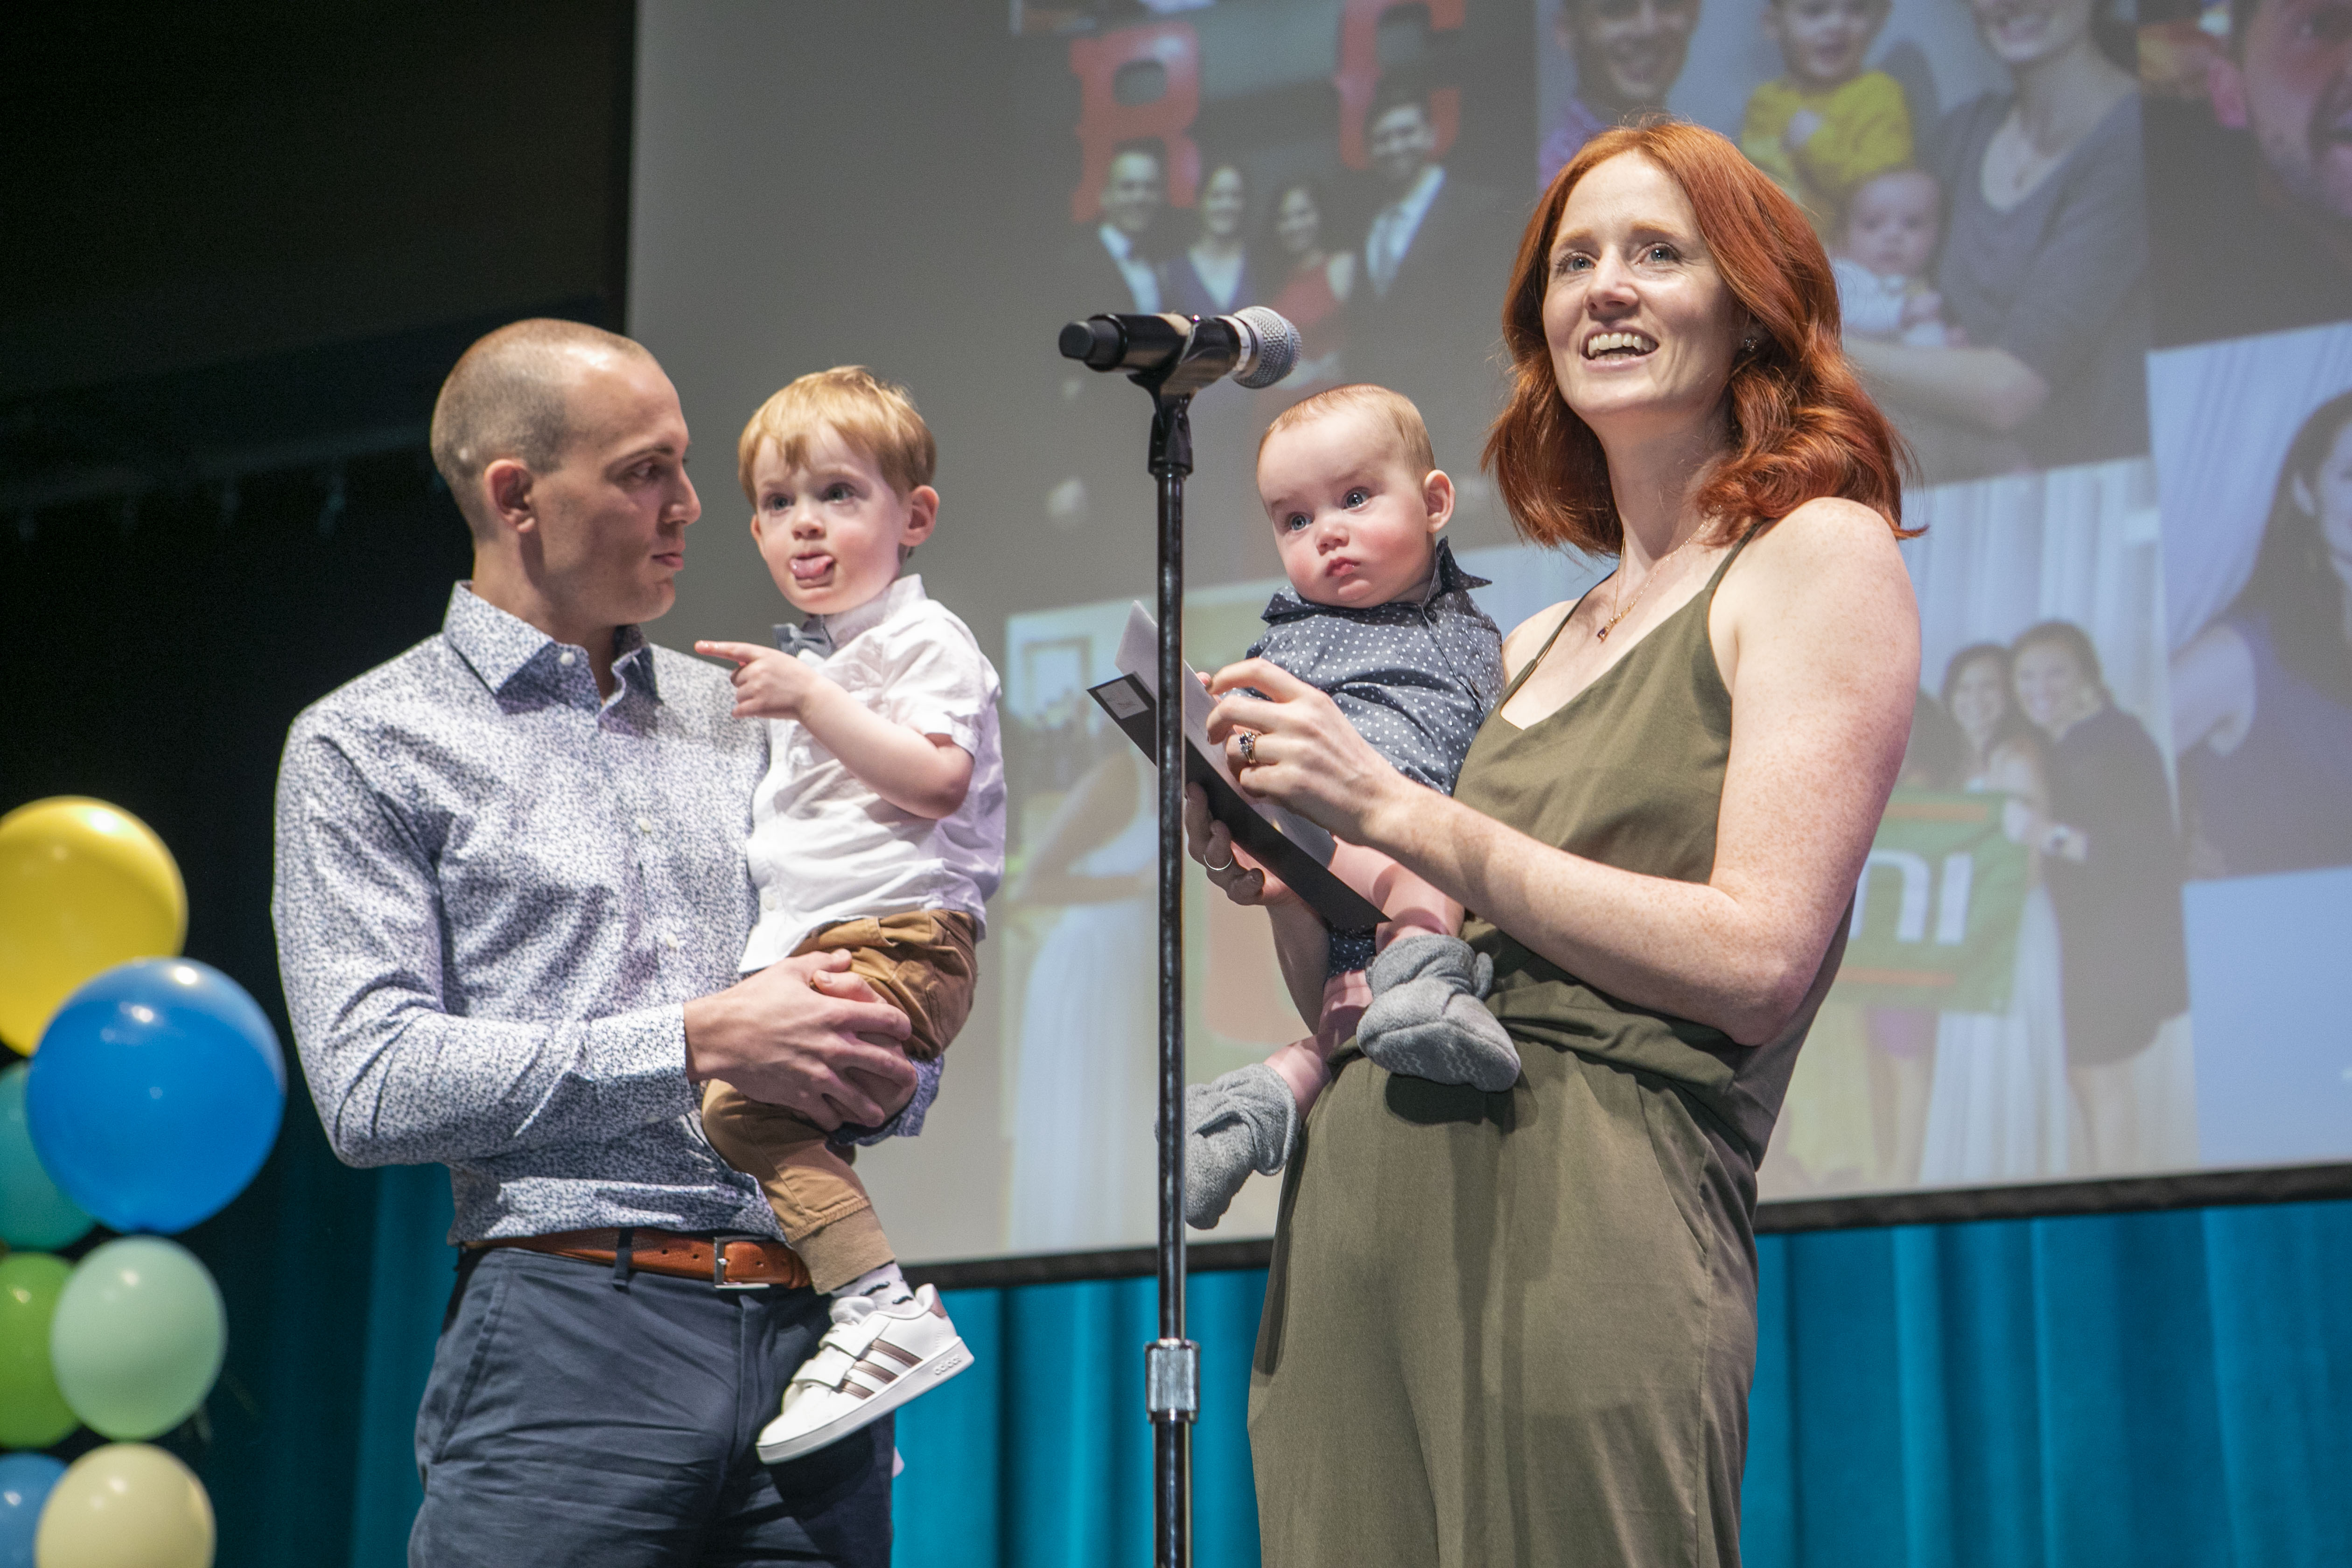 A man and a woman both hold baby boys while standing on a stage.